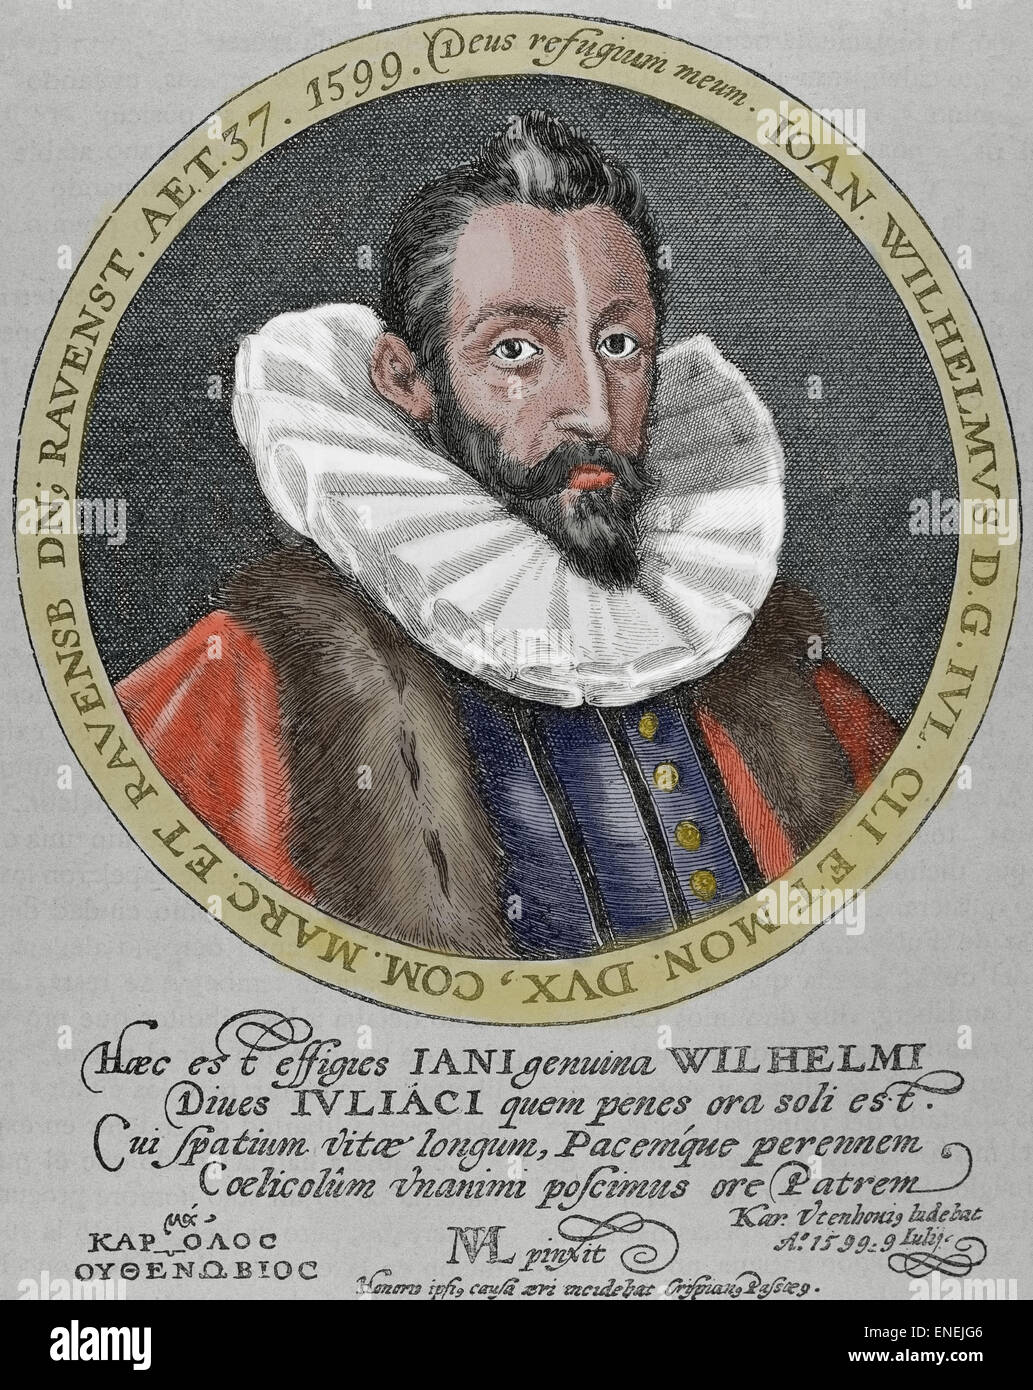 John William of Julich-Cleves-Berg (1562-1609). Duke of Julich-Cleves-Berg.  German noble and religious. Portrait. Engraving. Colored. Stock Photo